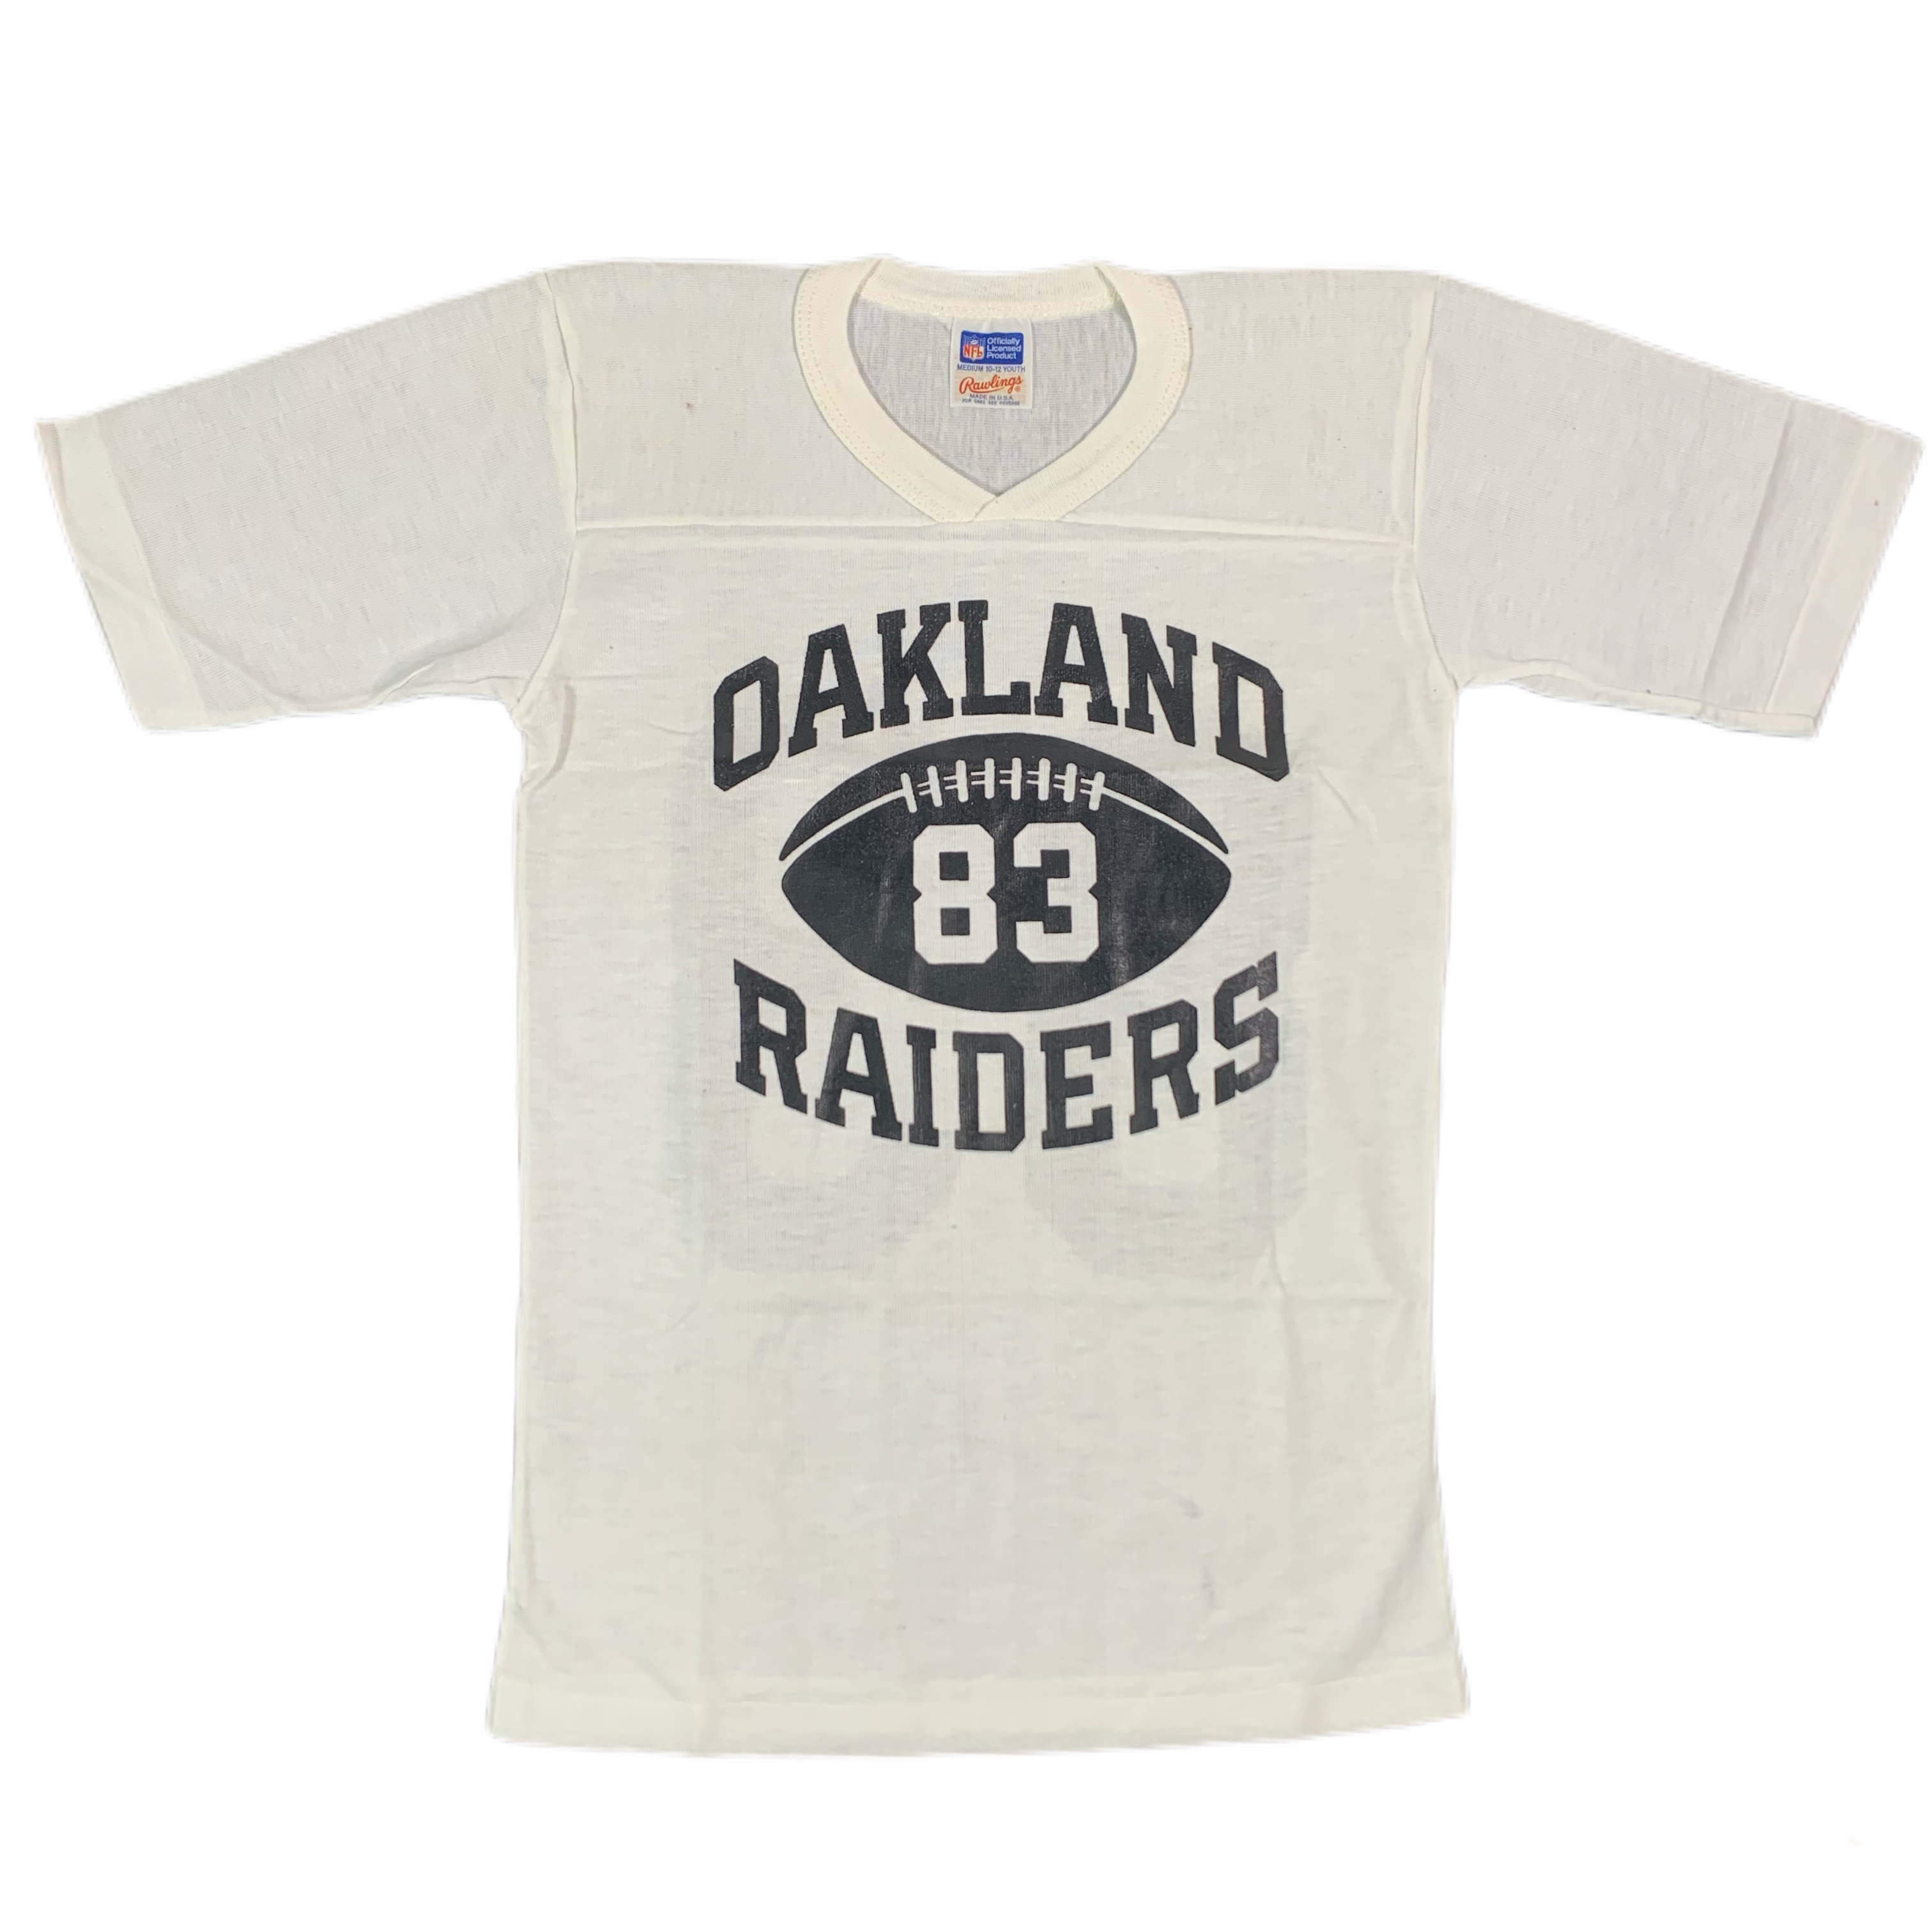 Oakland RAIDERS Jersey Officially Licensed NFL T-shirt 